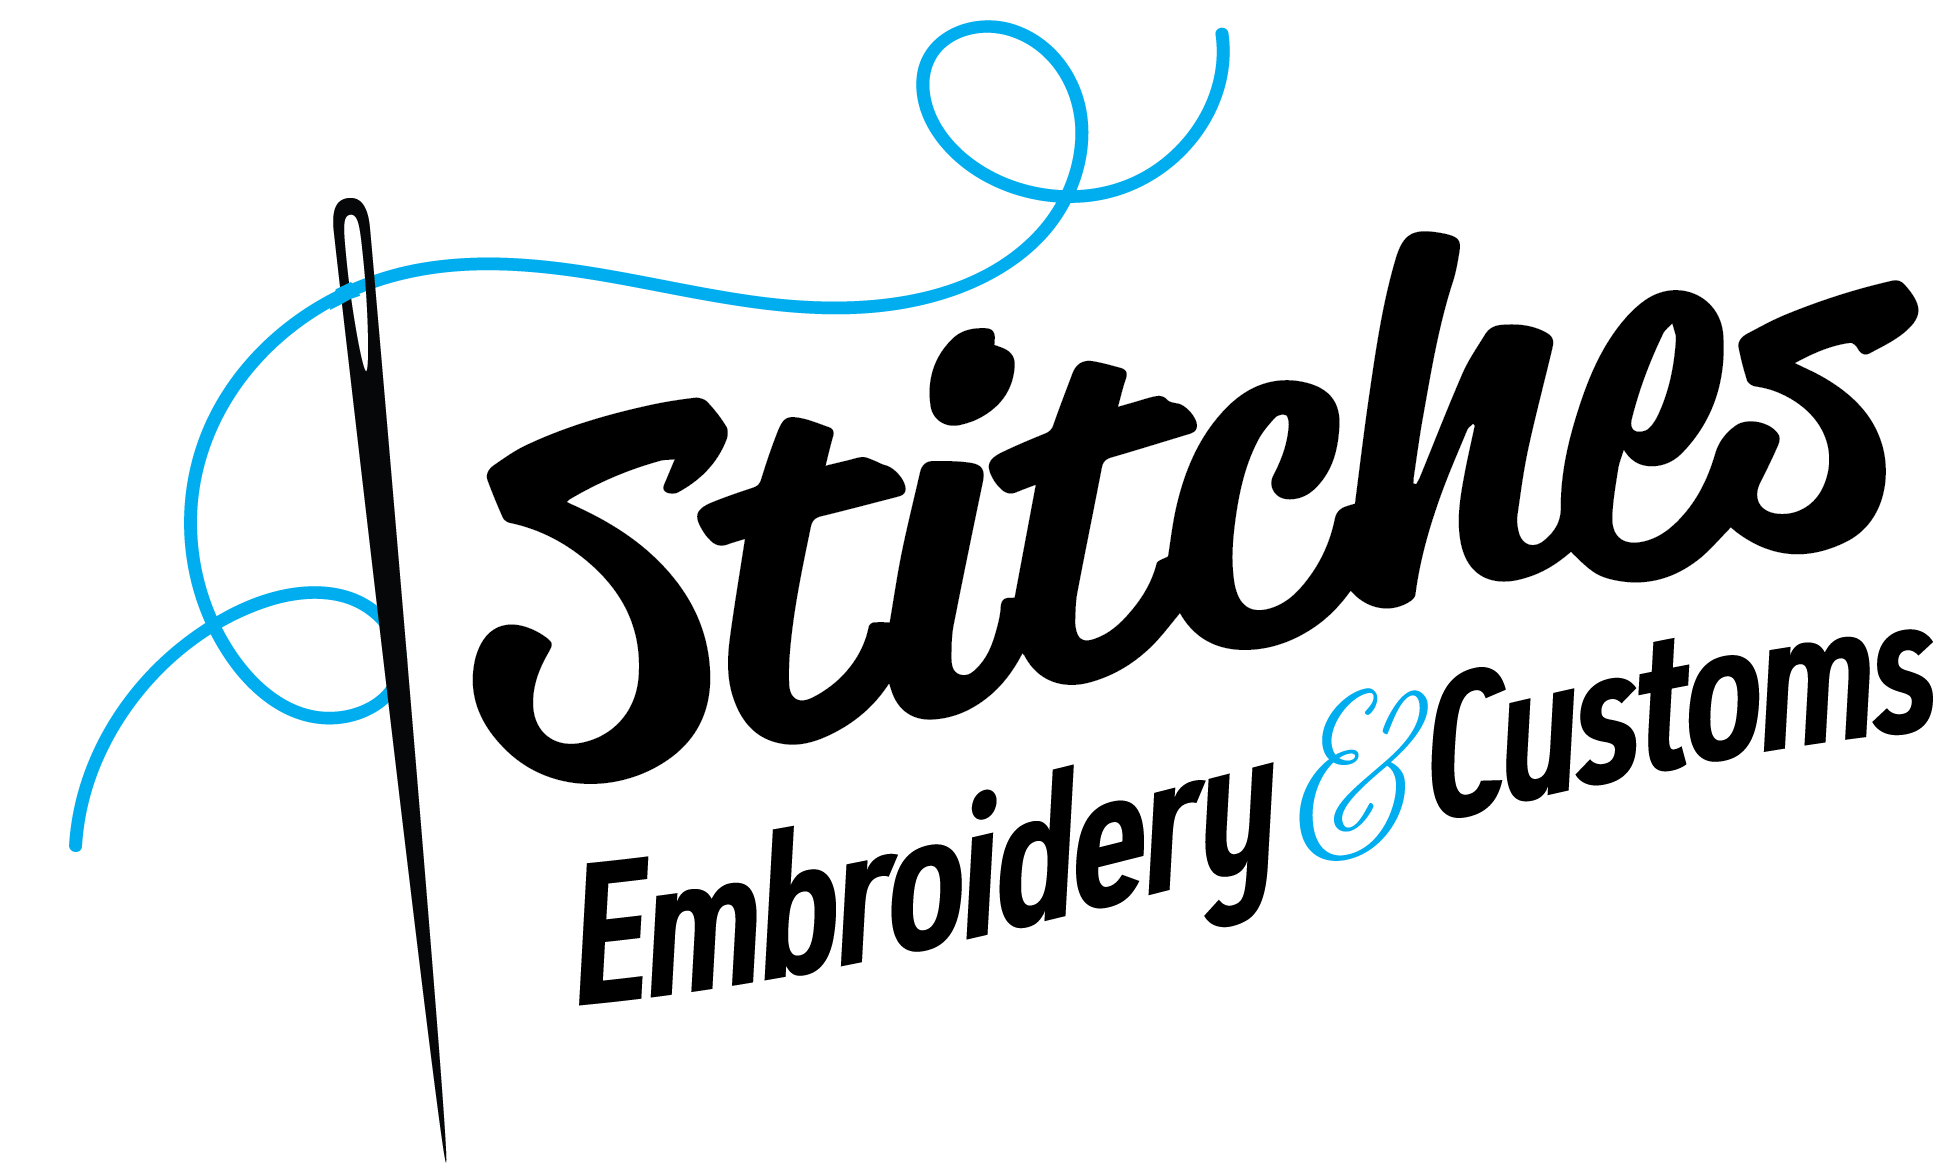 Stitches Embroidery & Customs logo